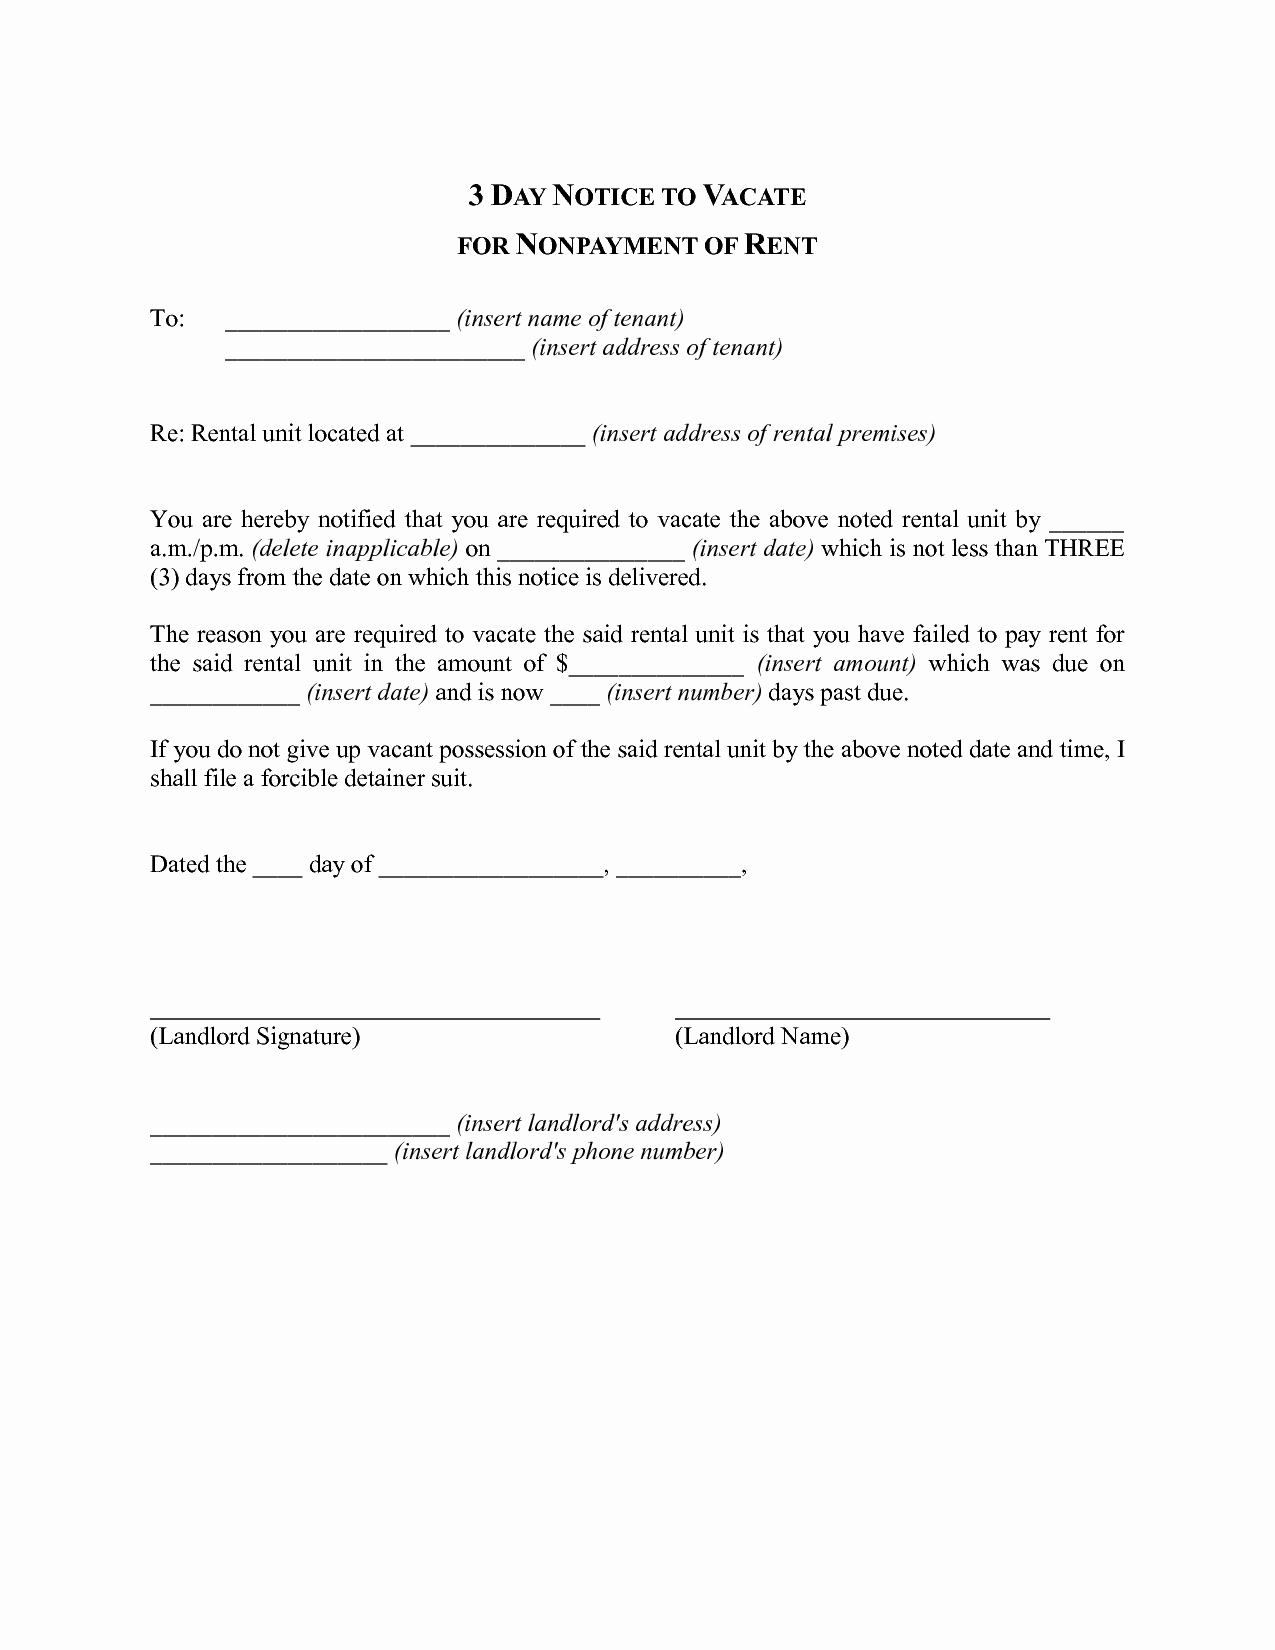 Texas Eviction Notice Template Beautiful Index Of Postpic 2014 08